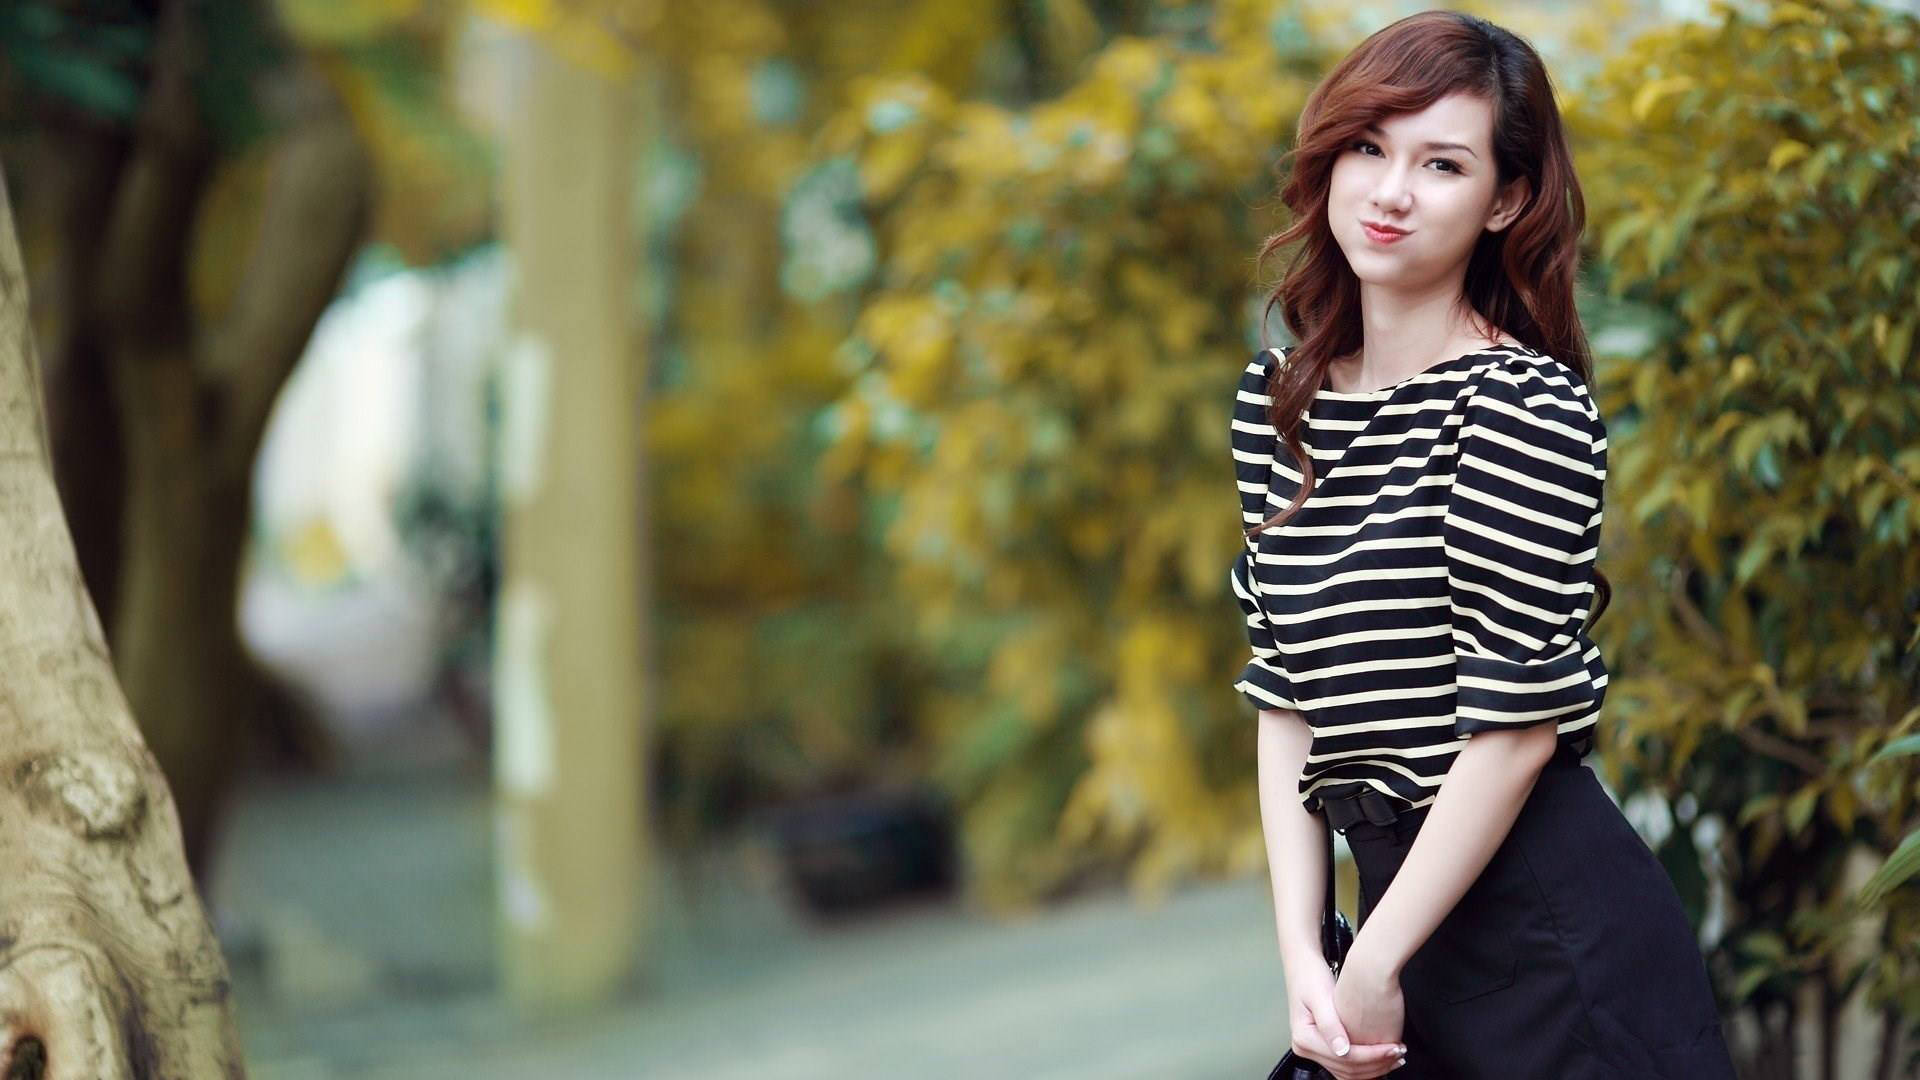 Asian Woman With A Shy Yet Cute Smile Wallpaper